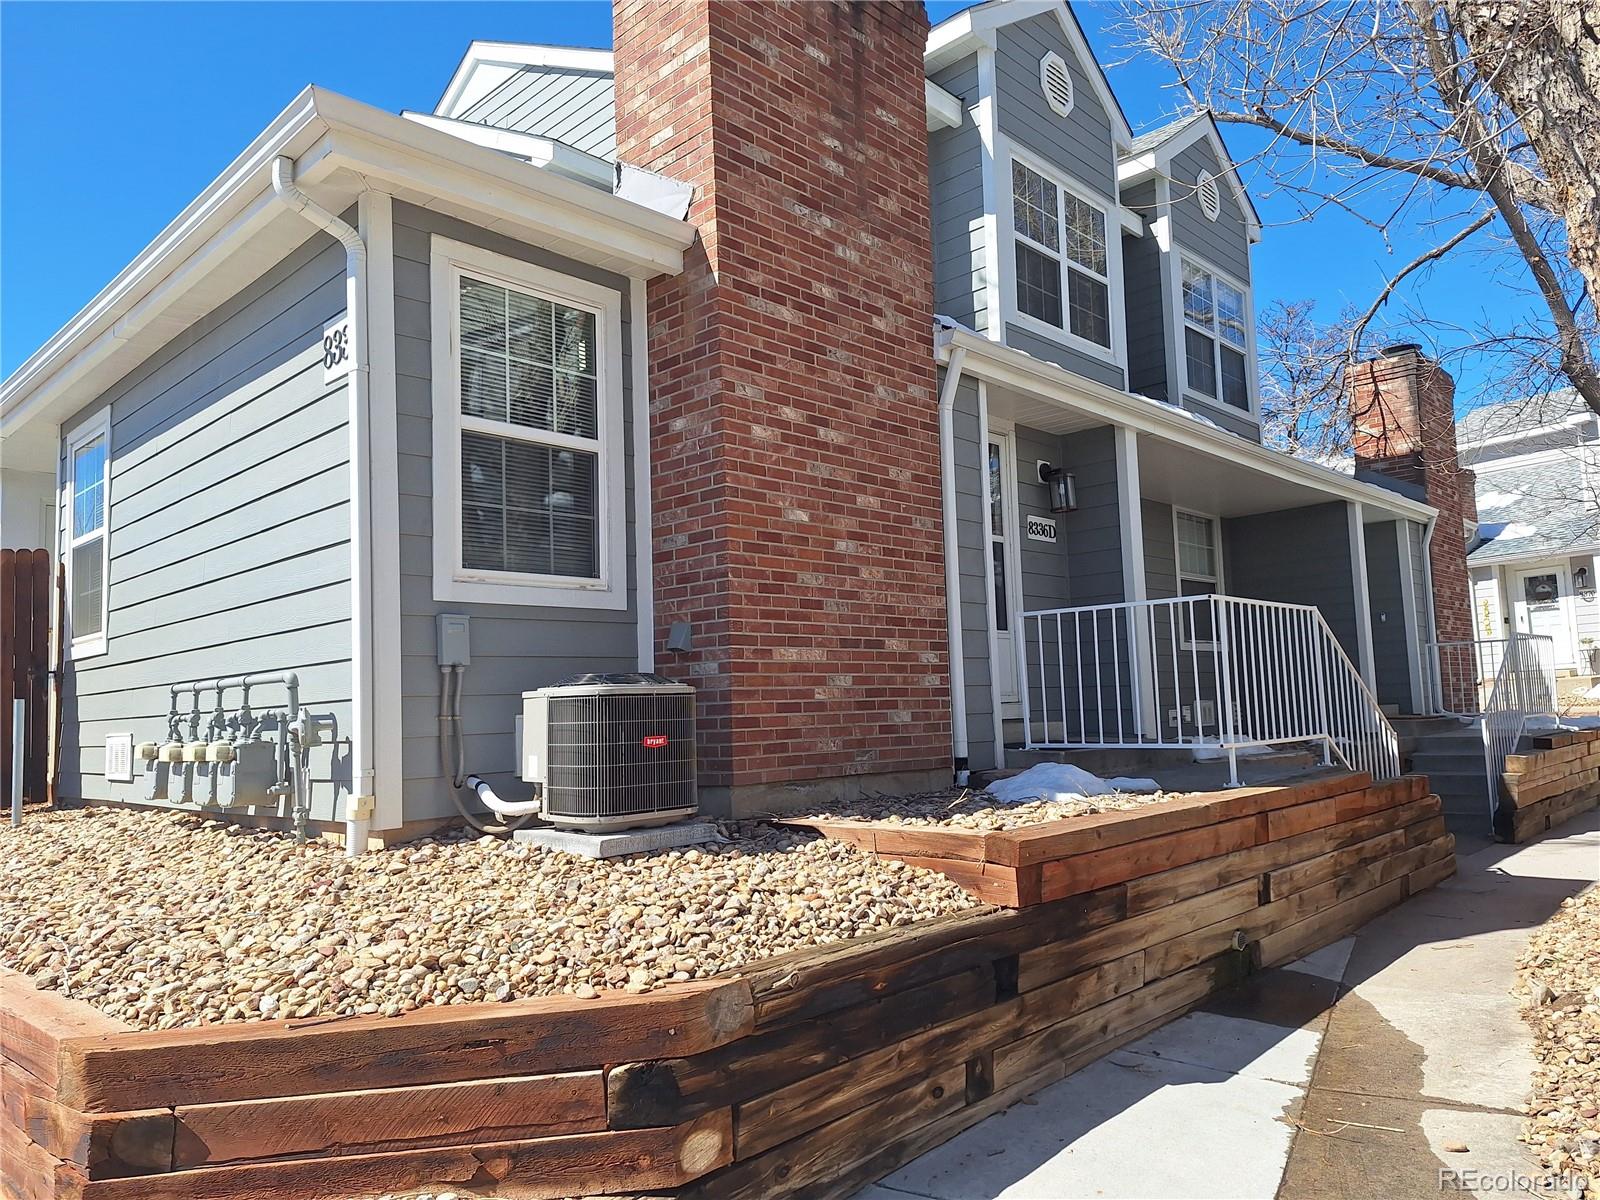 8336 W 87th Drive, arvada MLS: 2650336 Beds: 2 Baths: 2 Price: $394,500